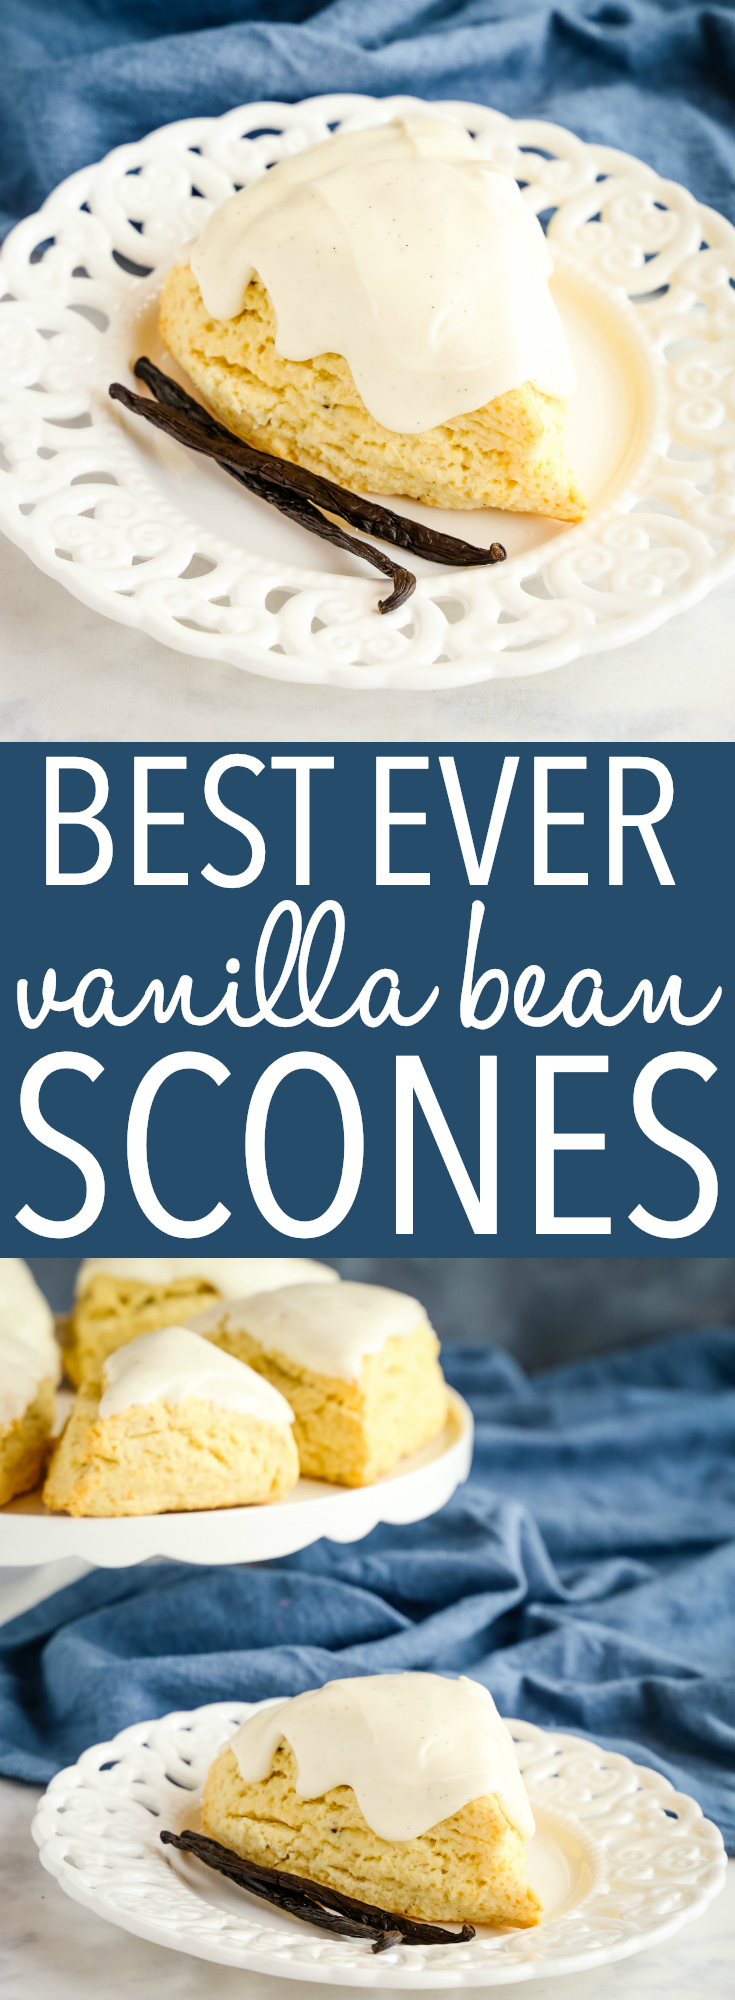 These Vanilla Bean Scones are the perfect make-at-home coffee shop treat for vanilla lovers! Follow all my pro tips for making the best homemade flaky scones! #scones #baking #homemade #tea #coffee #howtomakescones #bestsconerecipe #recipe #vanilla #vanillabean #vanillaextract #baker #foodblog via @busybakerblog